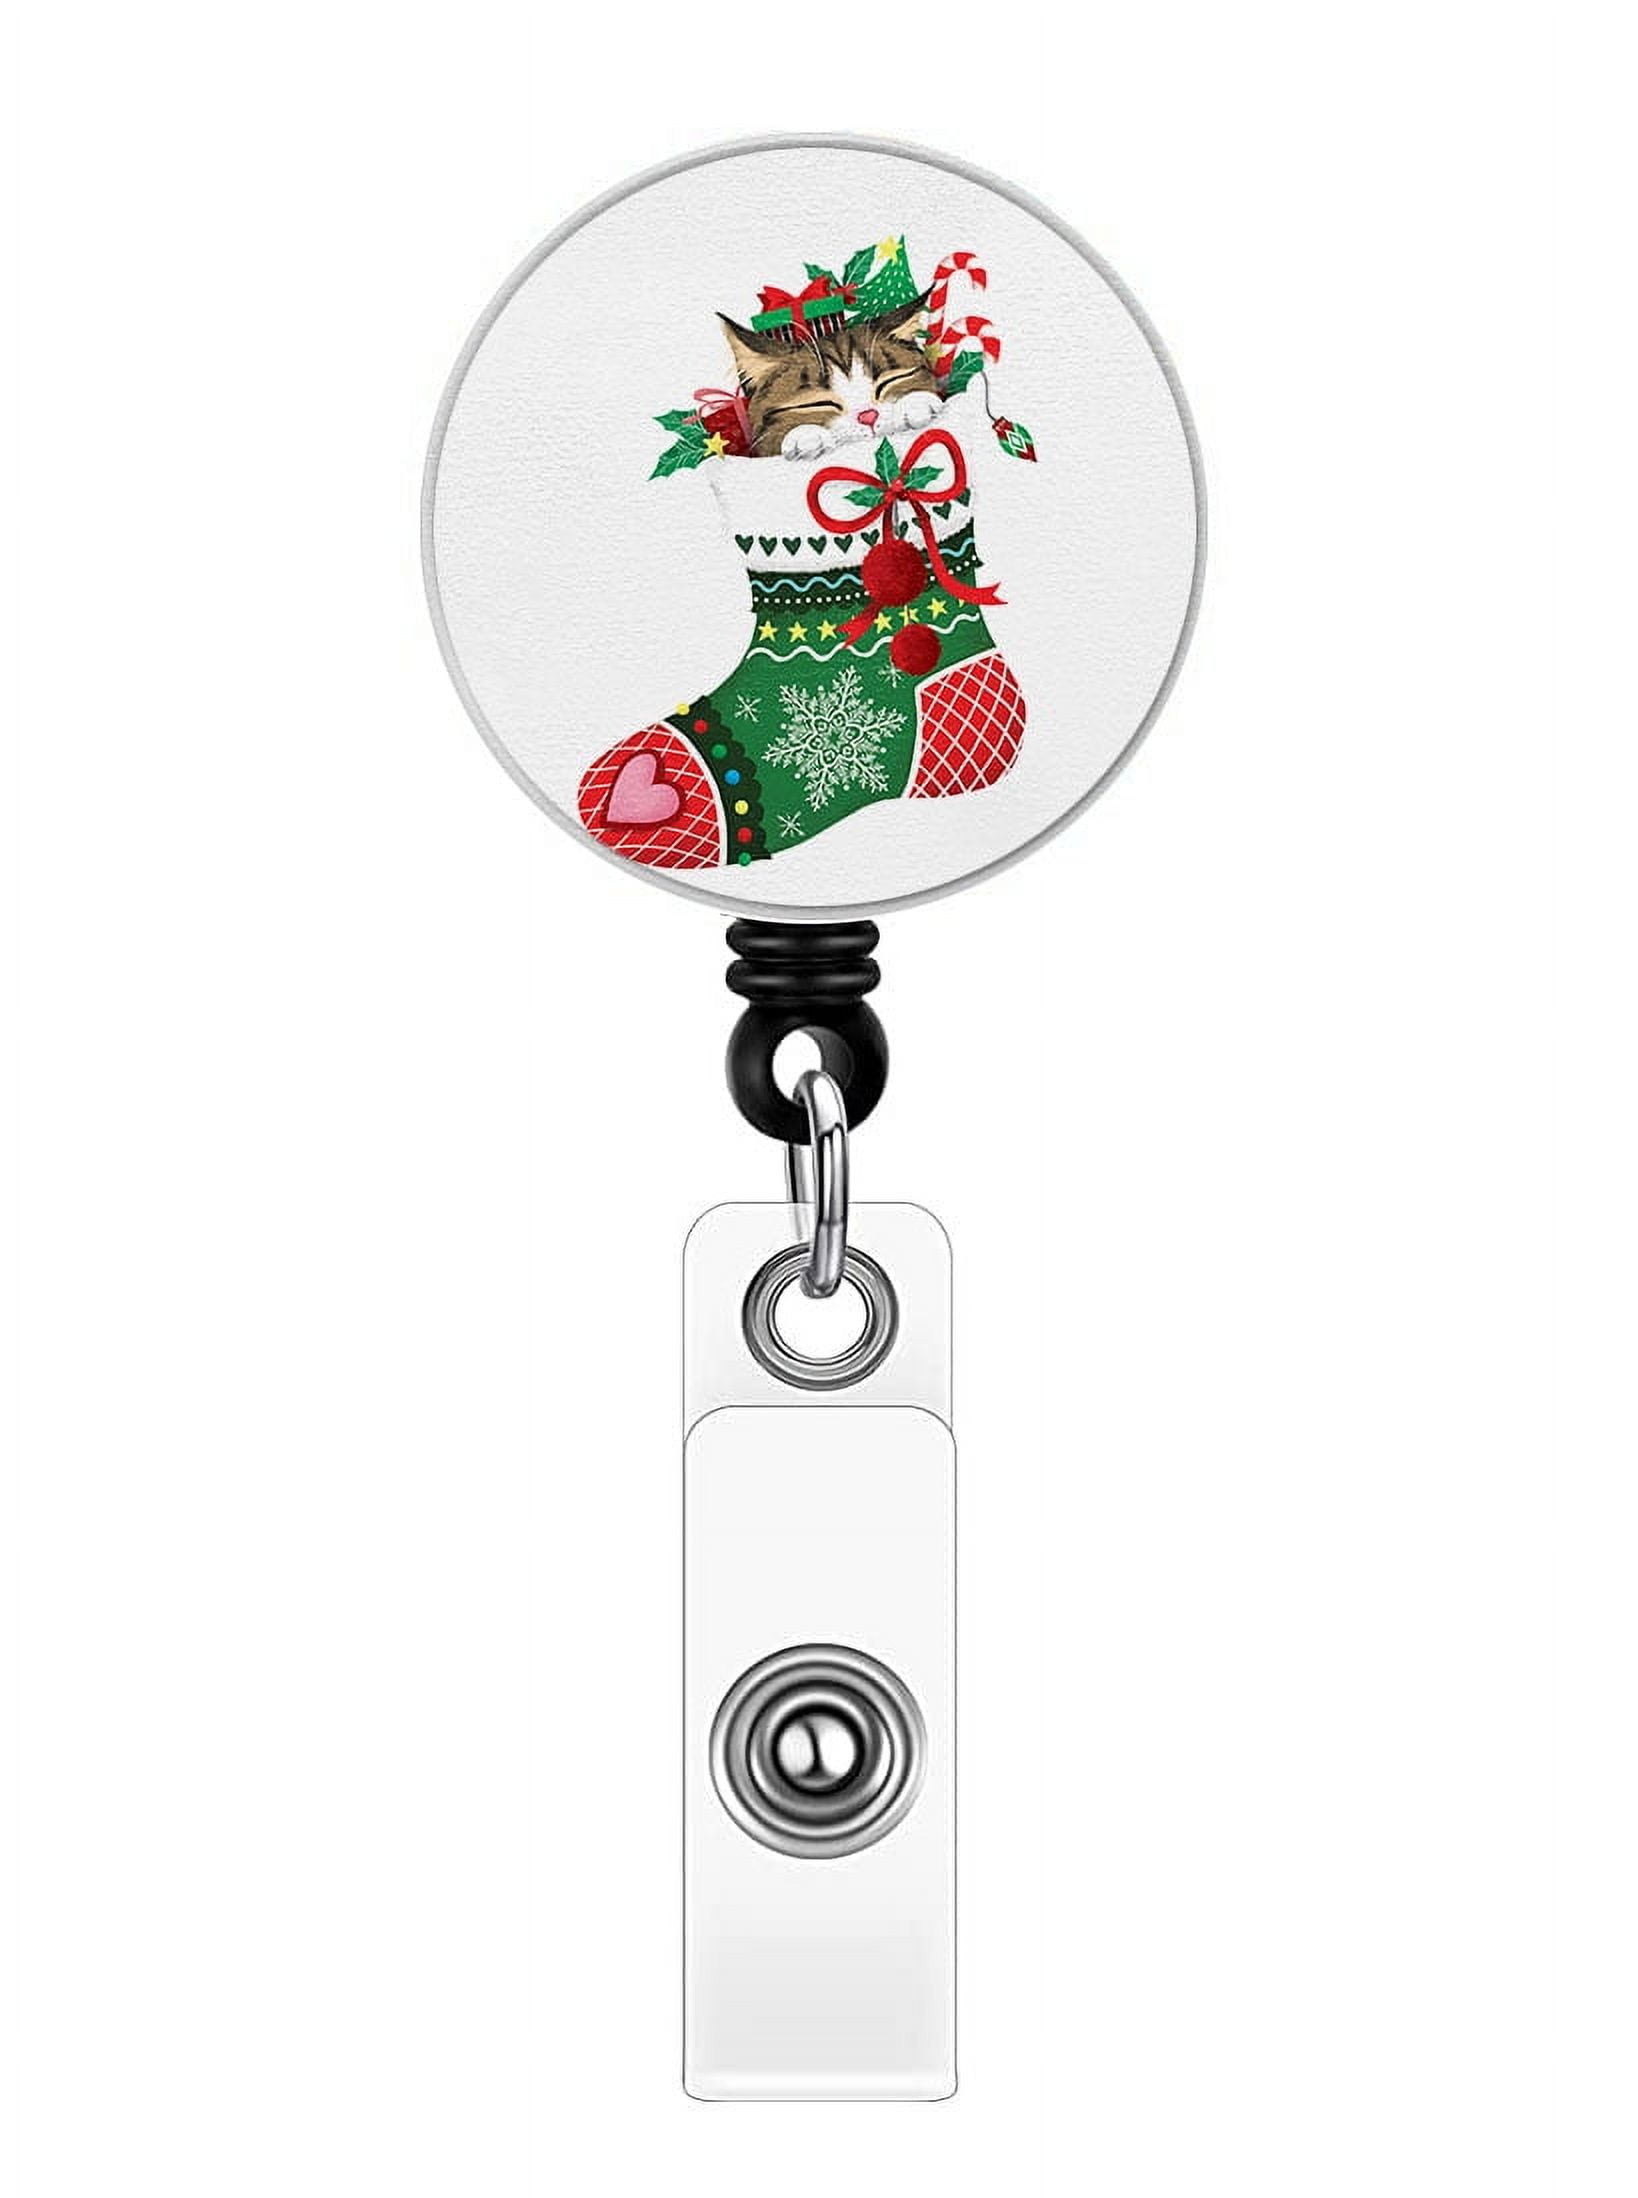 WIRESTER Retractable Badge Reels with Alligator Swivel Clip & Plastic Card  Holder Strap, Round ID Badge Holders for Students, Teachers, Office Workers  - Xmas Santa Baby Ho Ho Ho Green 